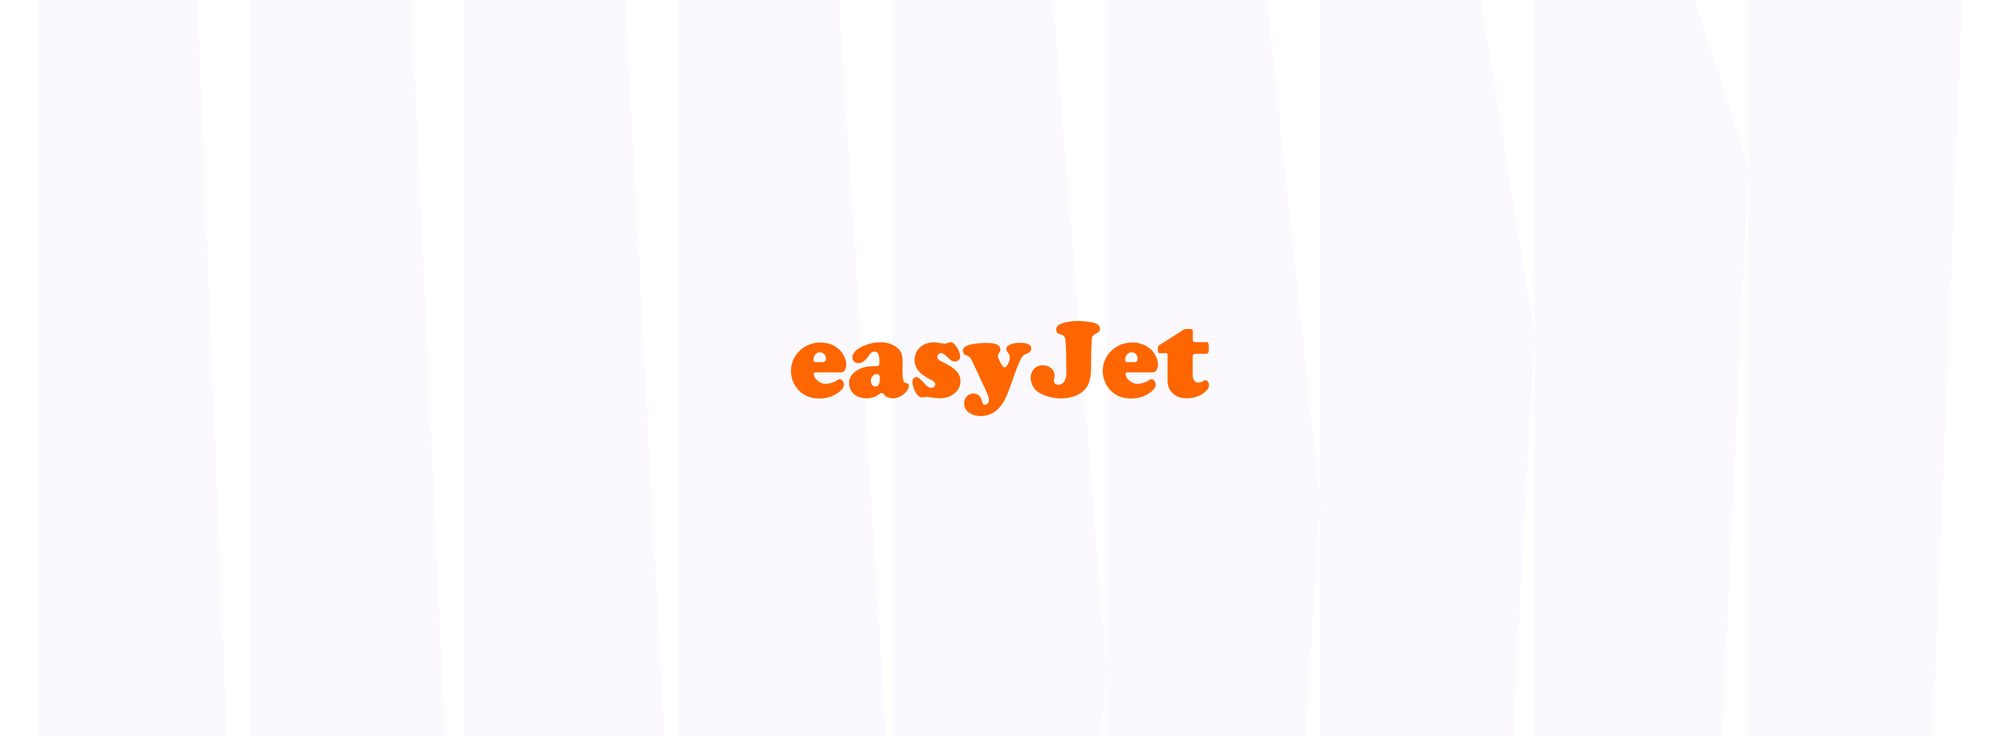 easyJet, Europe’s leading airline, is live on Duffel